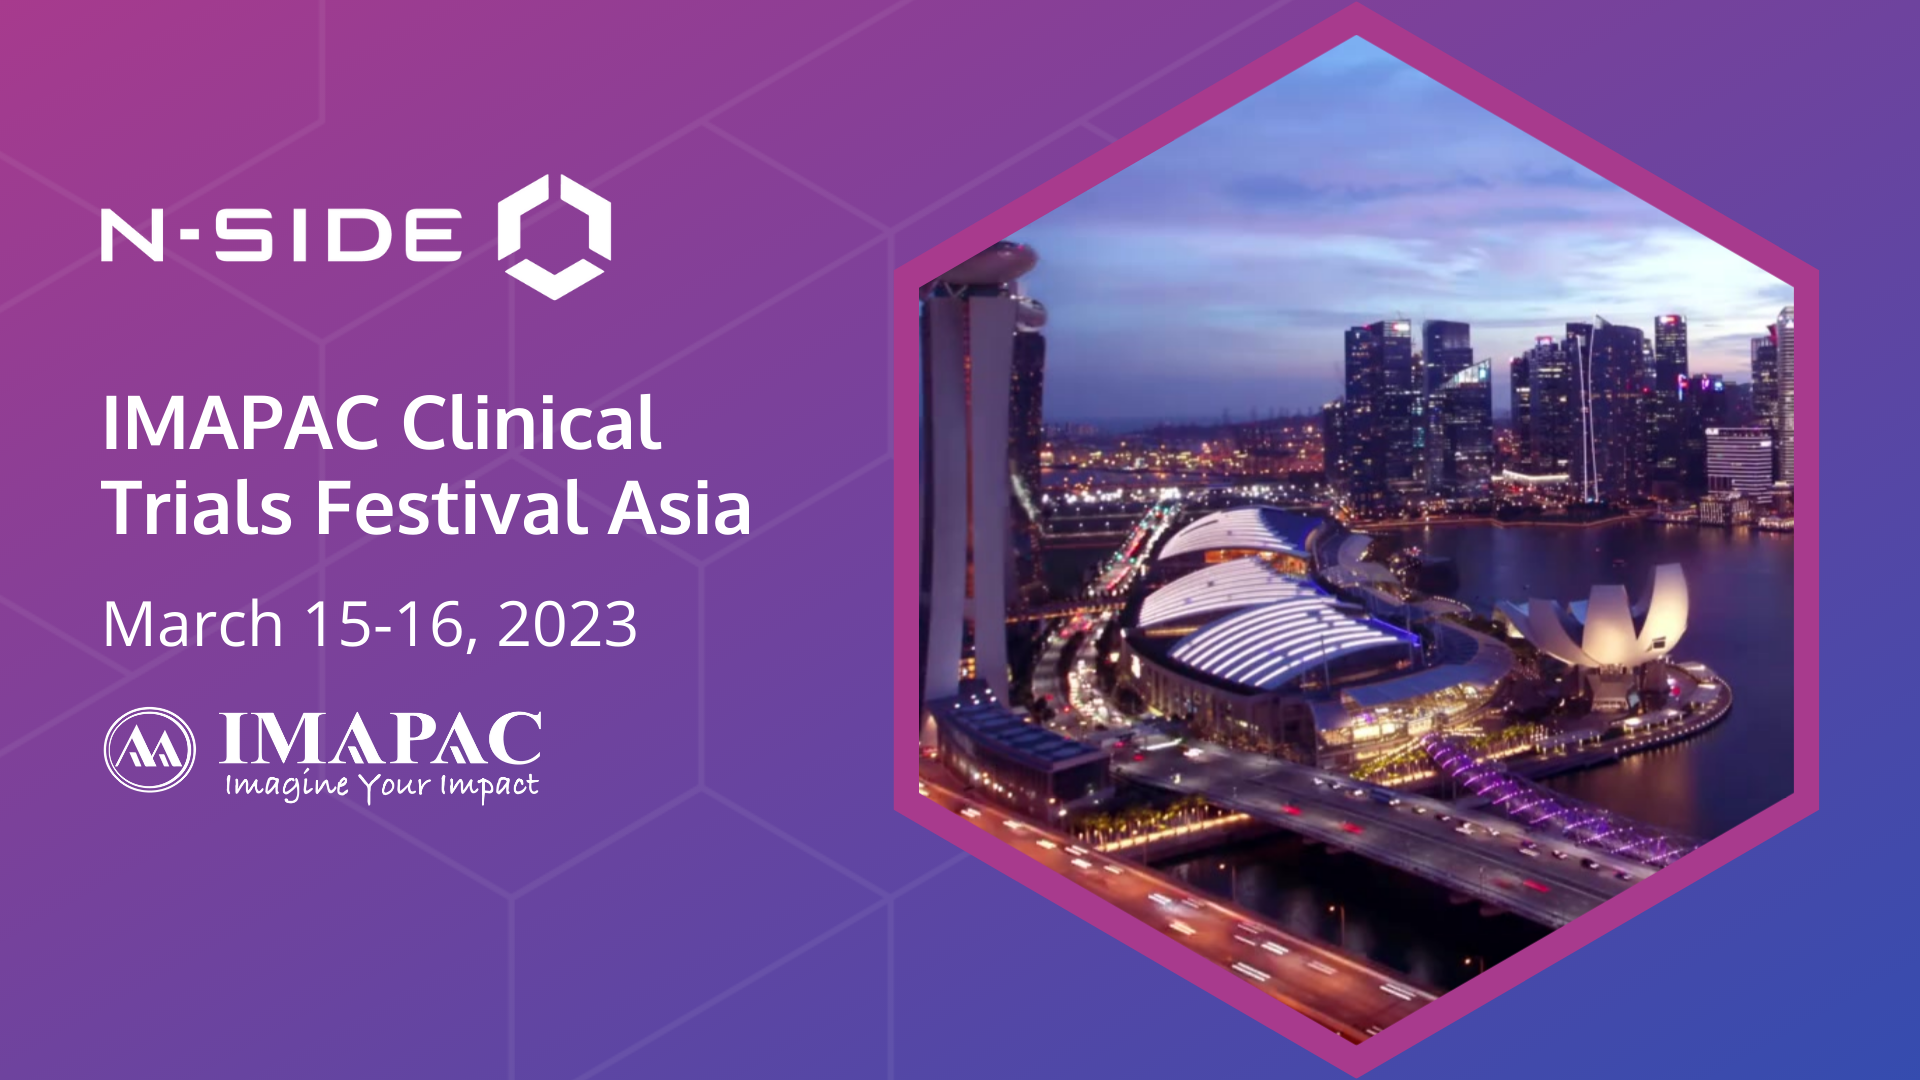 For the first time, meet N-SIDE in Singapore at the CTFA 2023